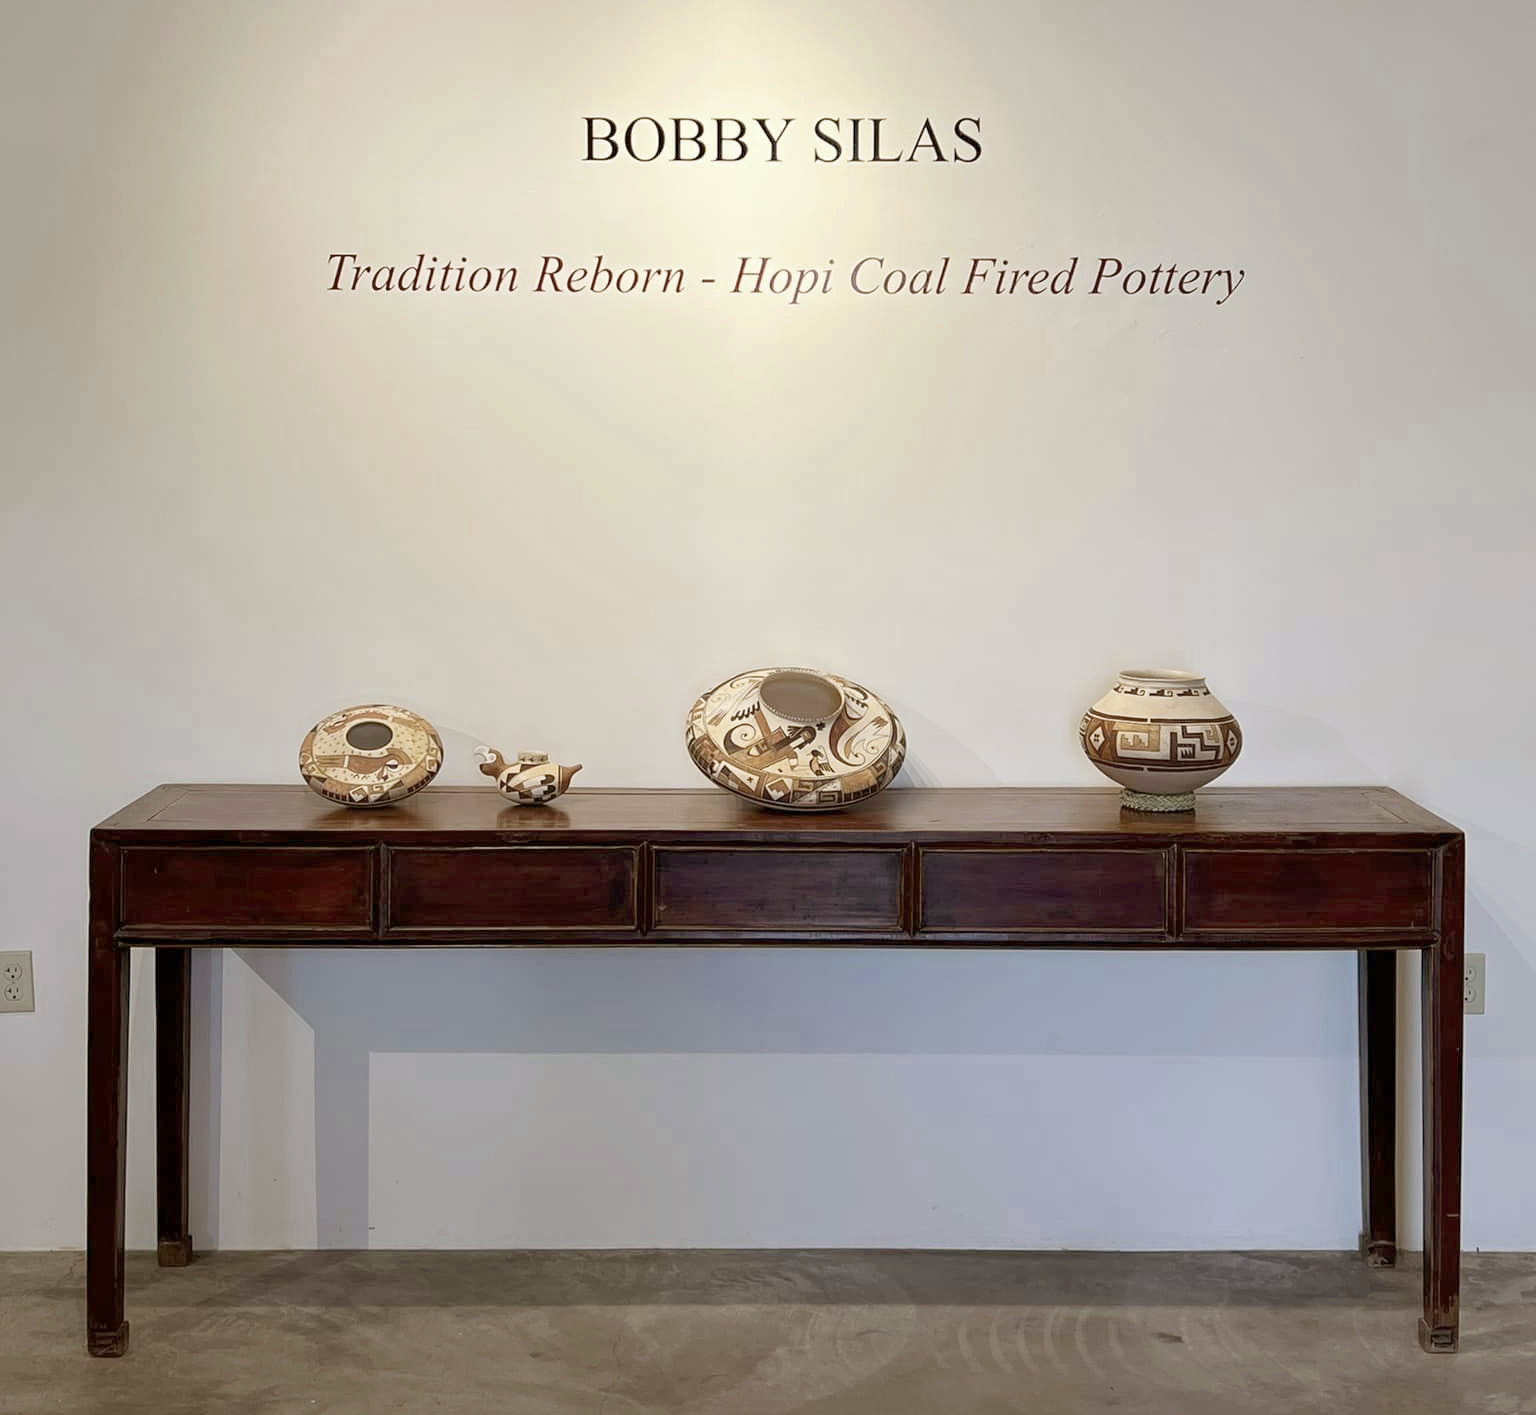 Bobby Silas, Tradition Reborn - Hopi Coal Fired Pottery exhibition through August